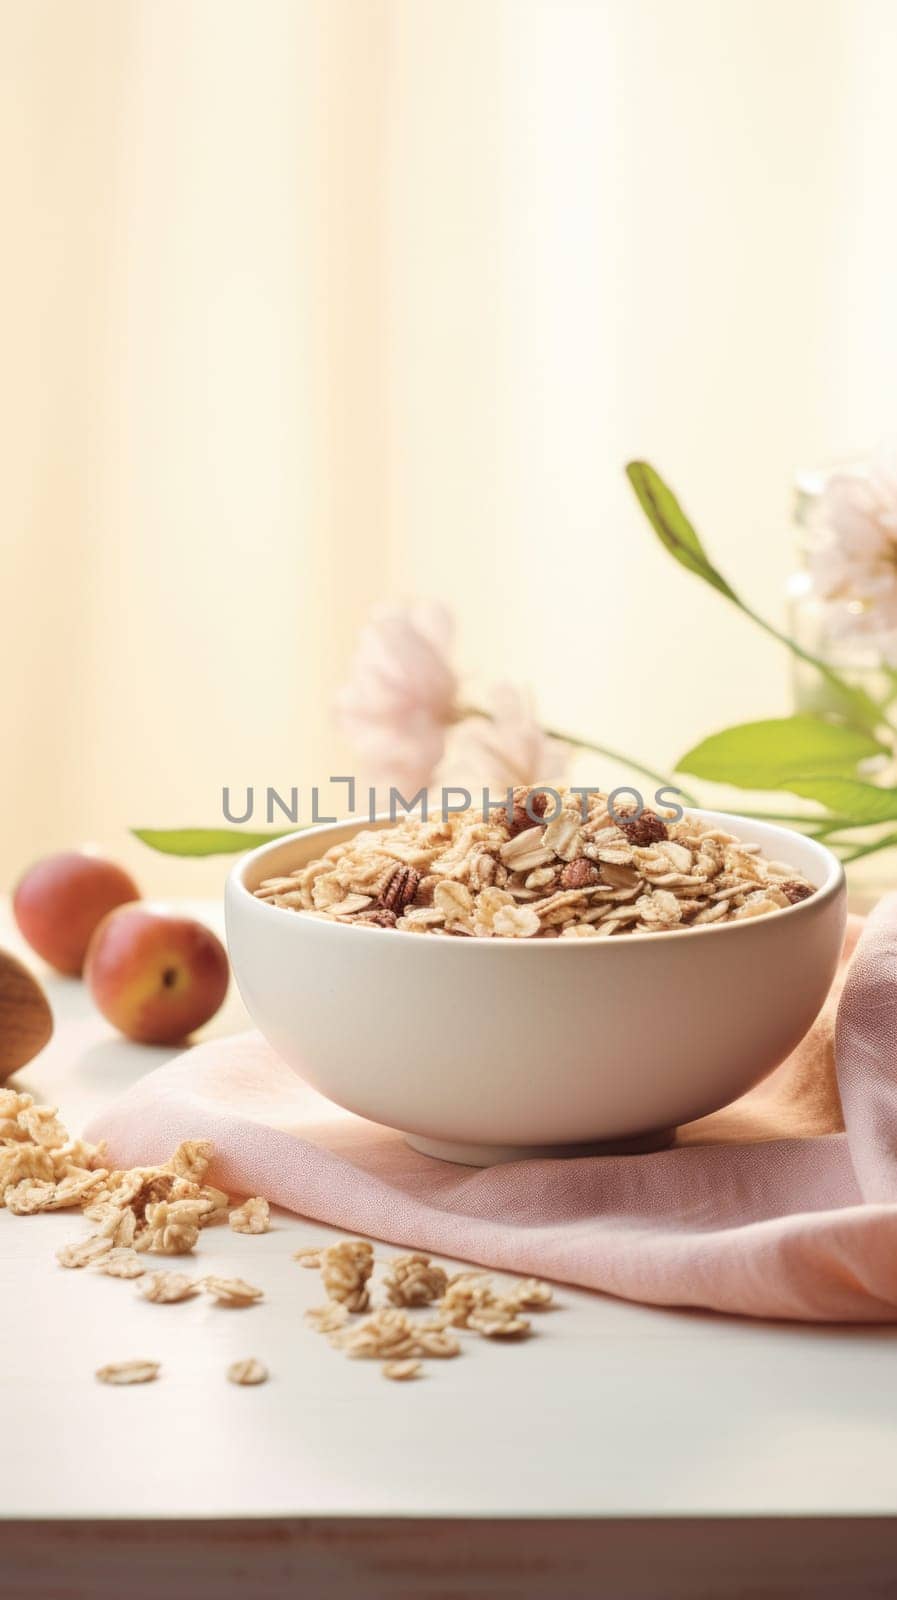 Cereal with almonds and apricots on a table, AI by starush